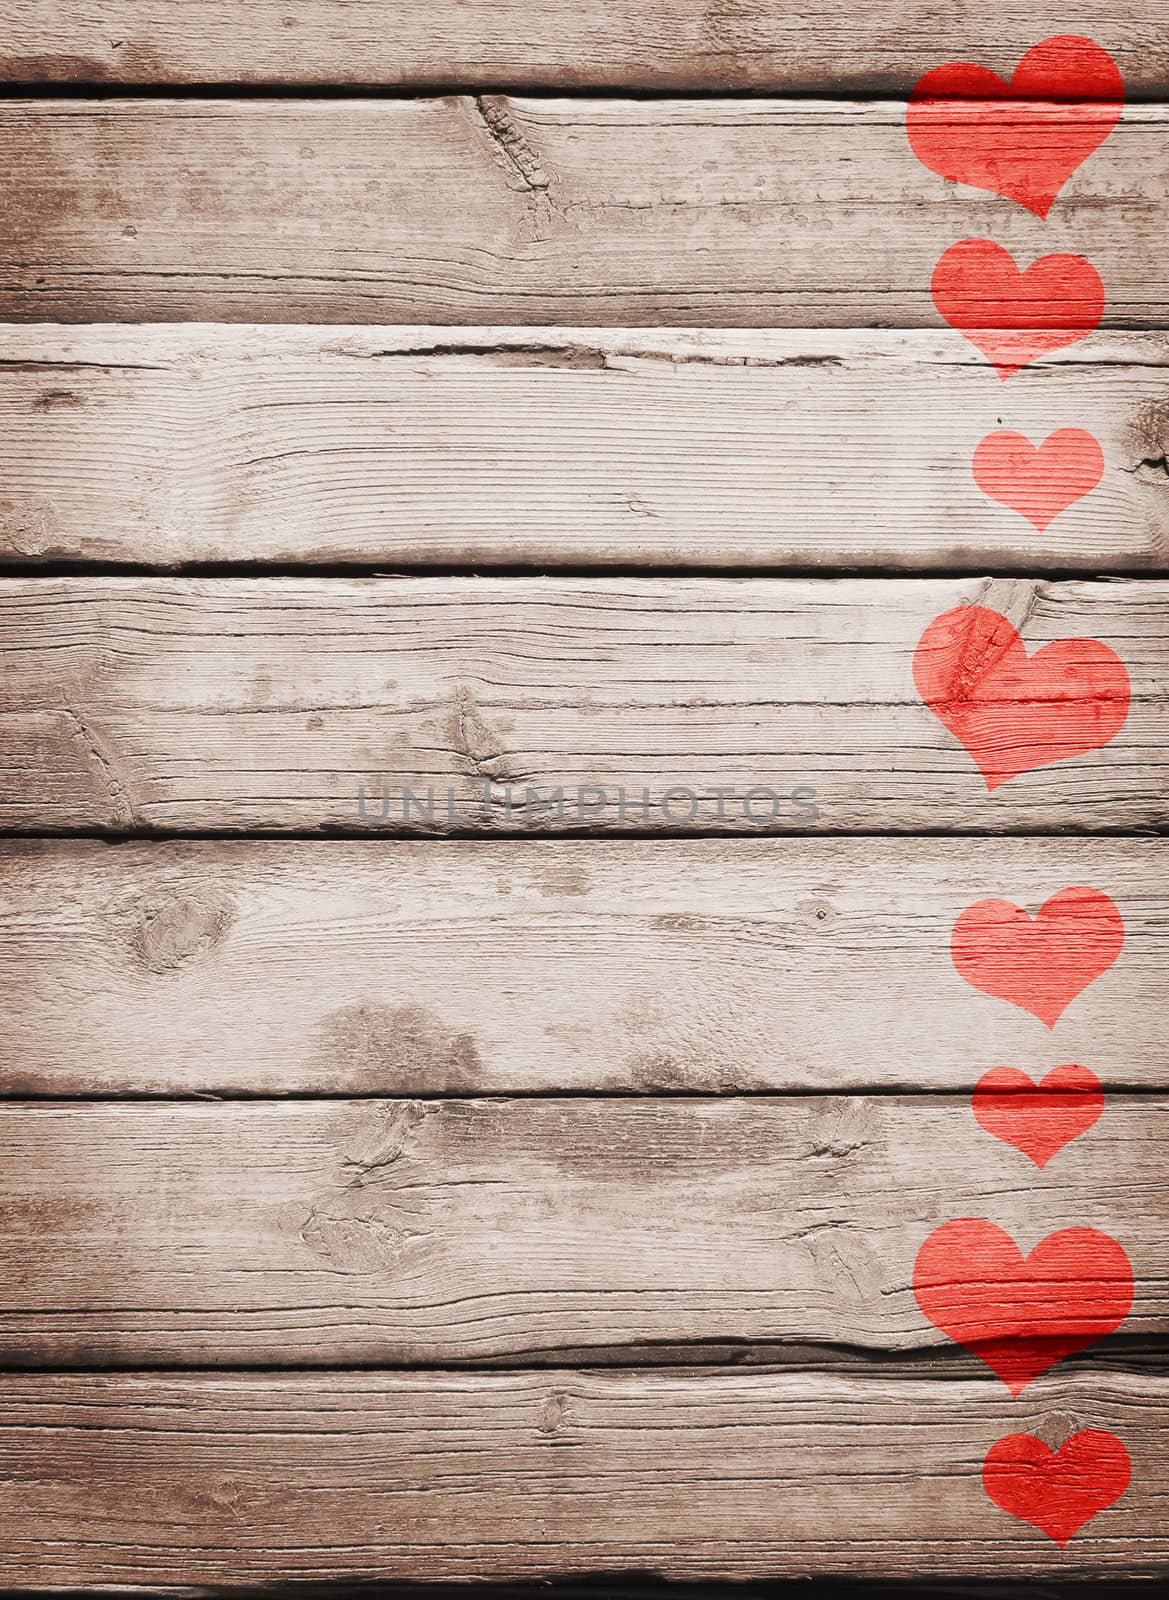 Red hearts painted on a wooden surface. The concept of Valentine's Day